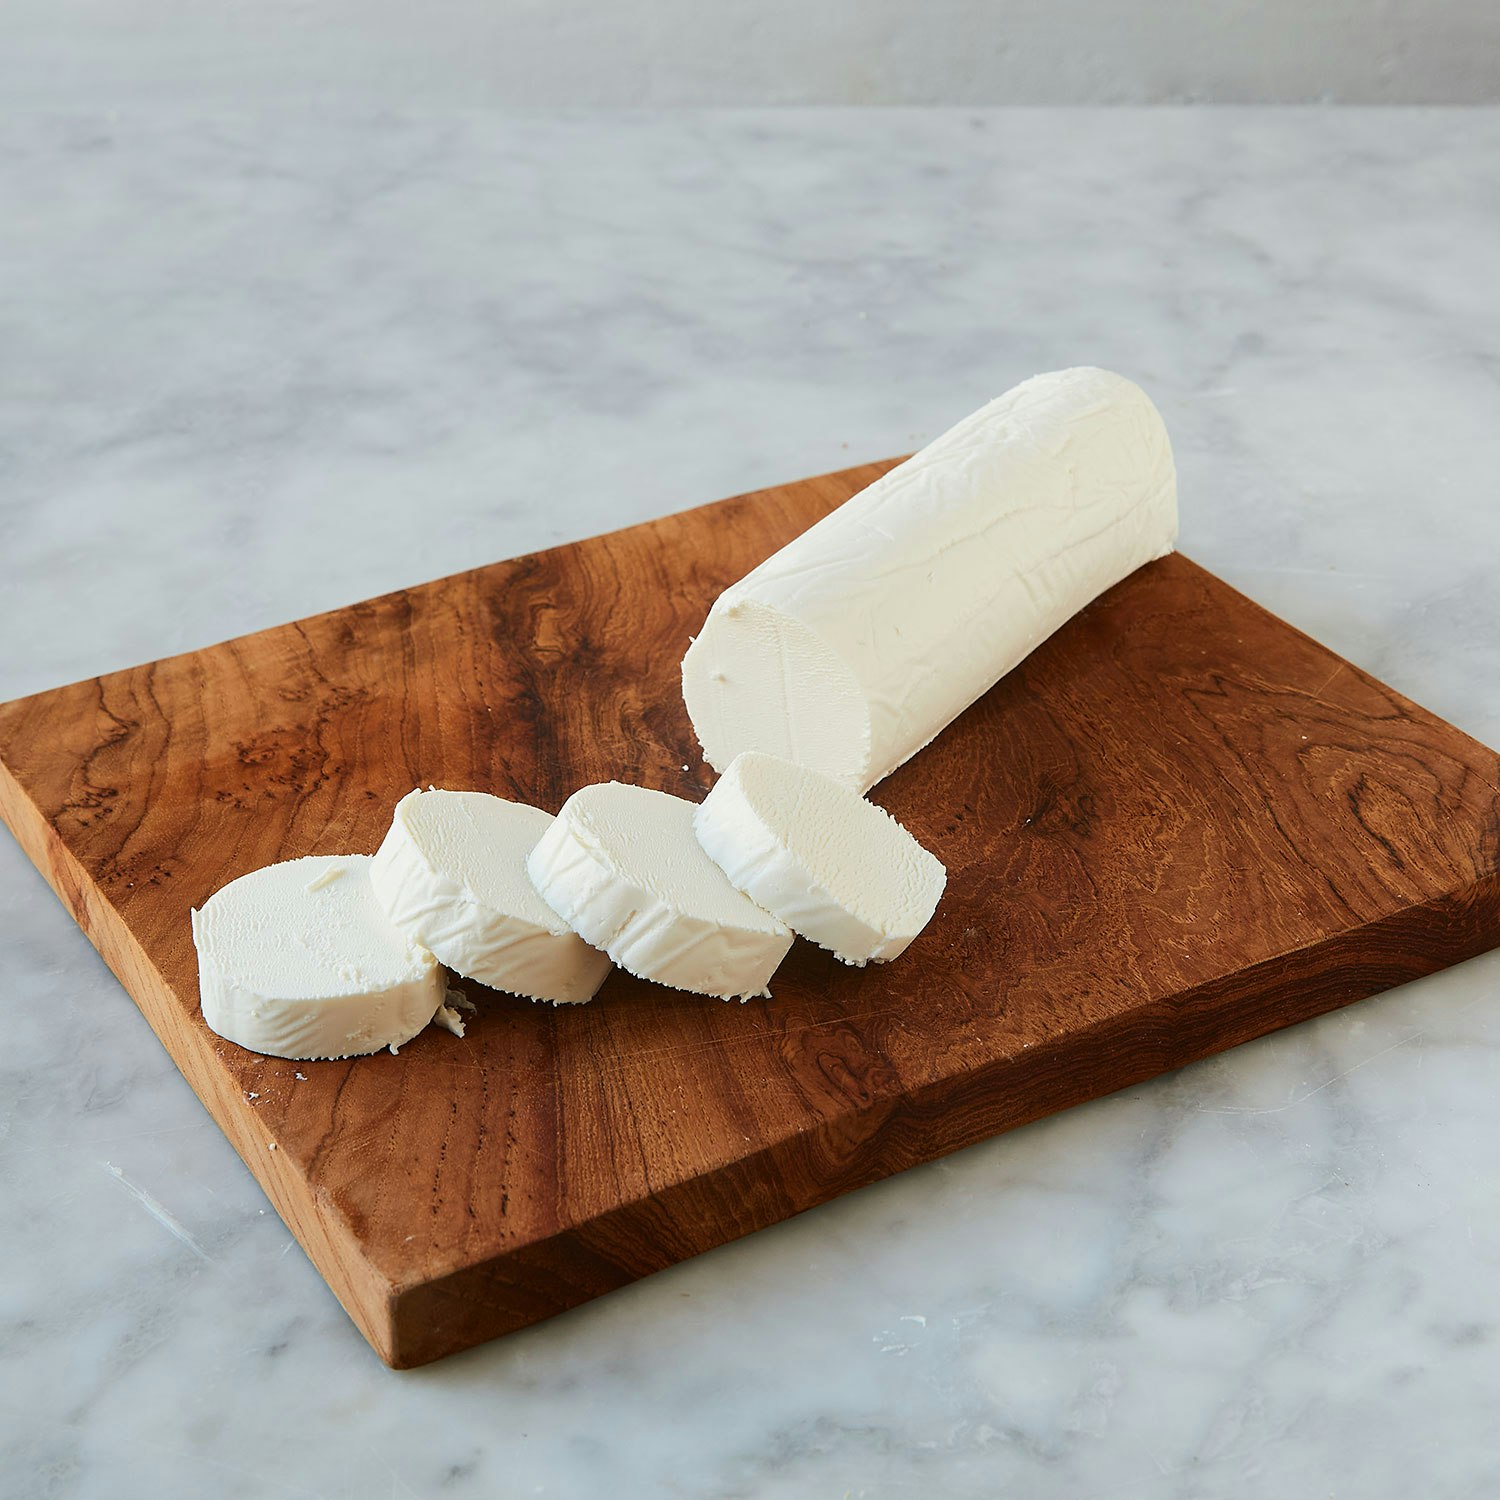 vermont creamery large goat log cheese